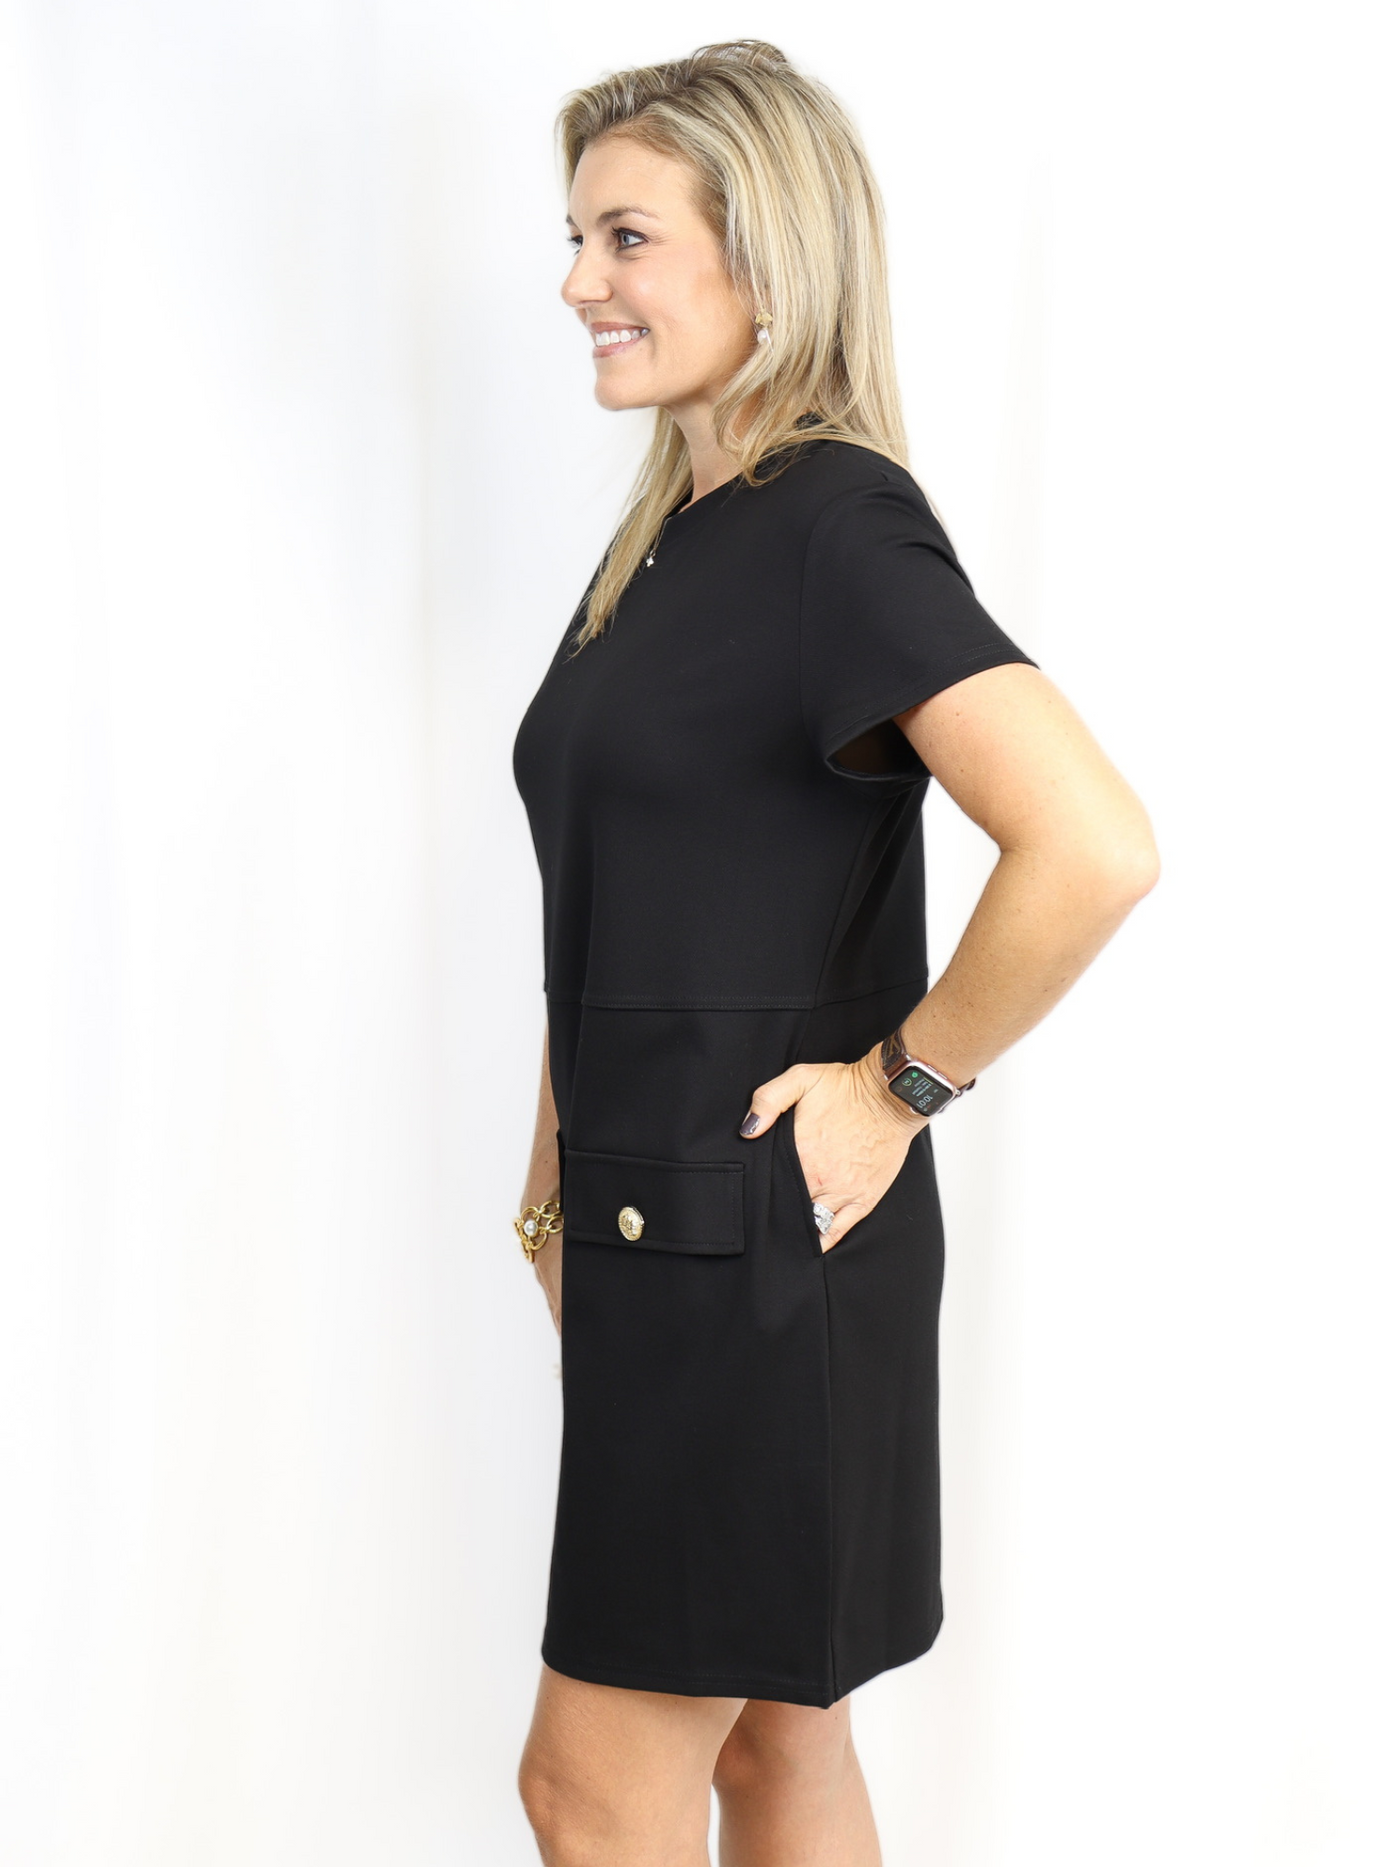 Black Shift Dress with Gold Buttons displaying side pocket